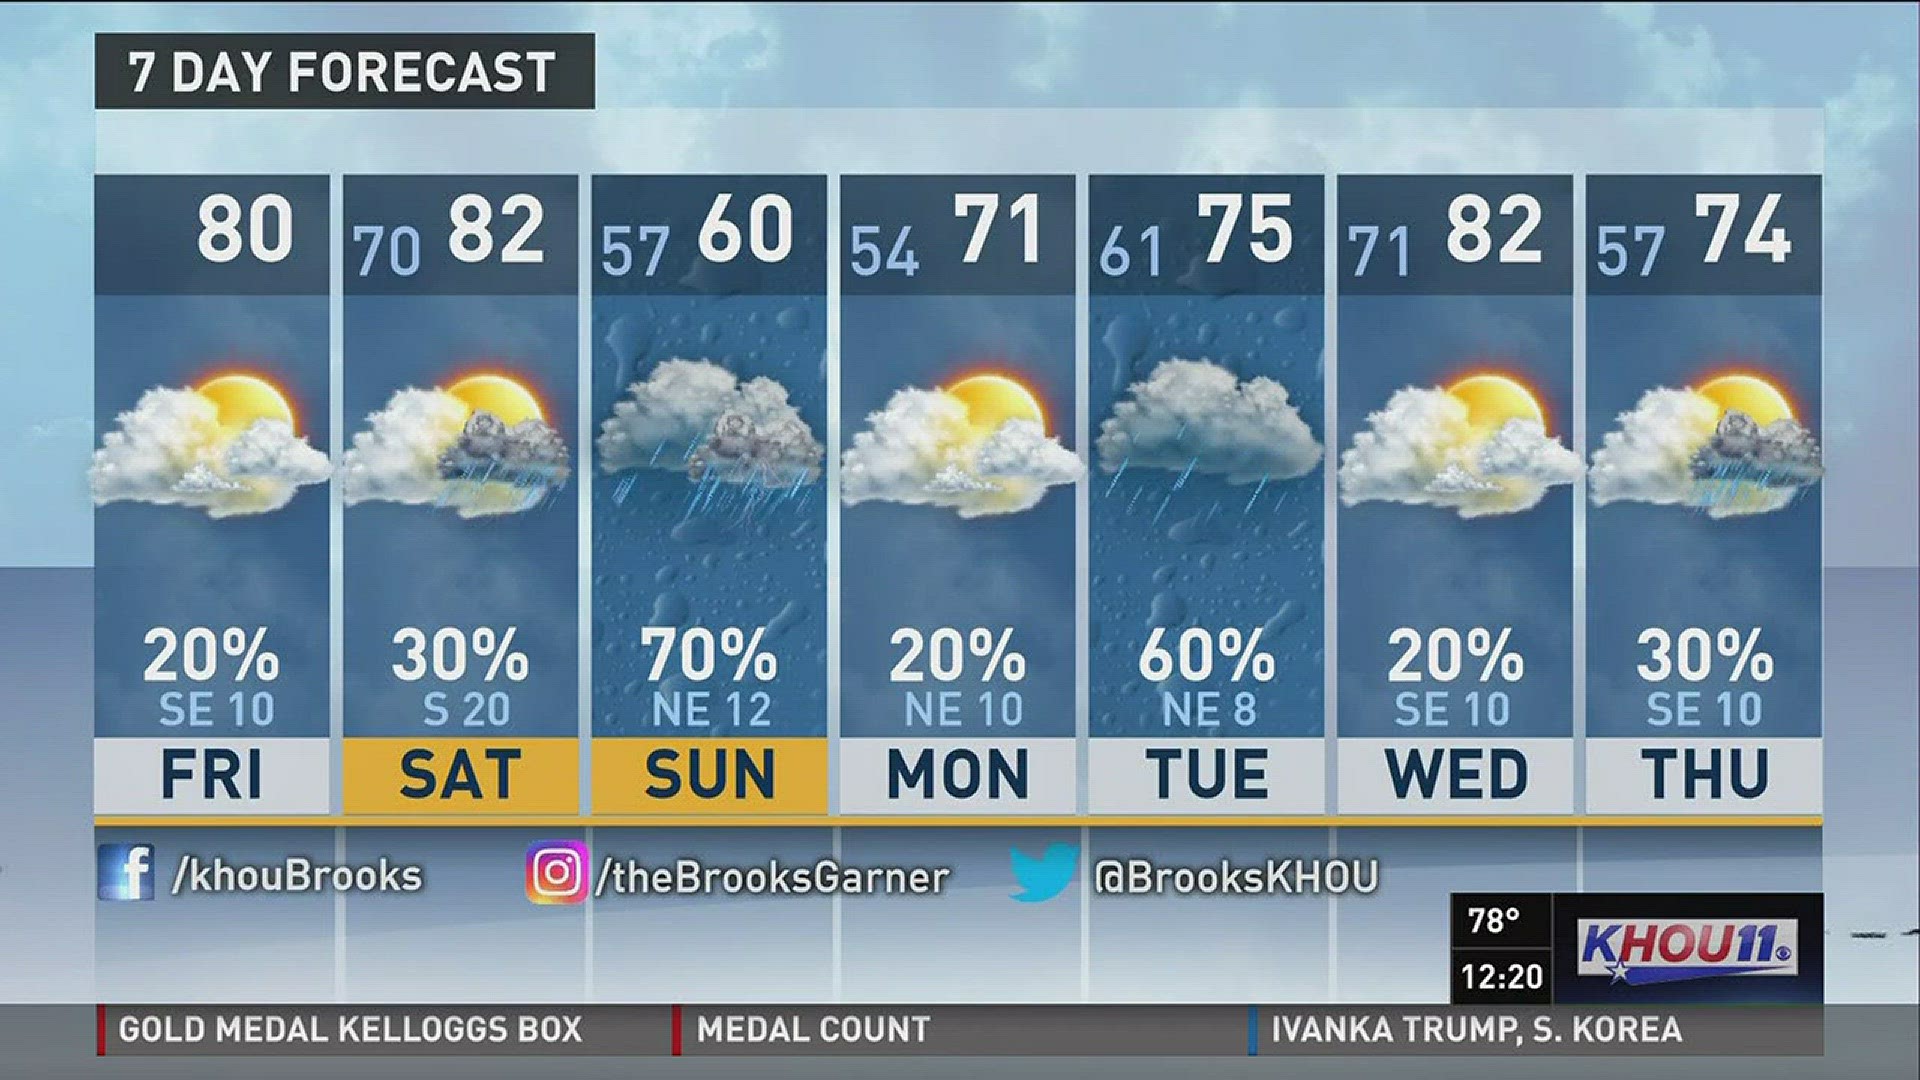 KHOU 11 Meteorologist Brooks Garner says it will be warm and humid through Saturday and cooler on Sunday.